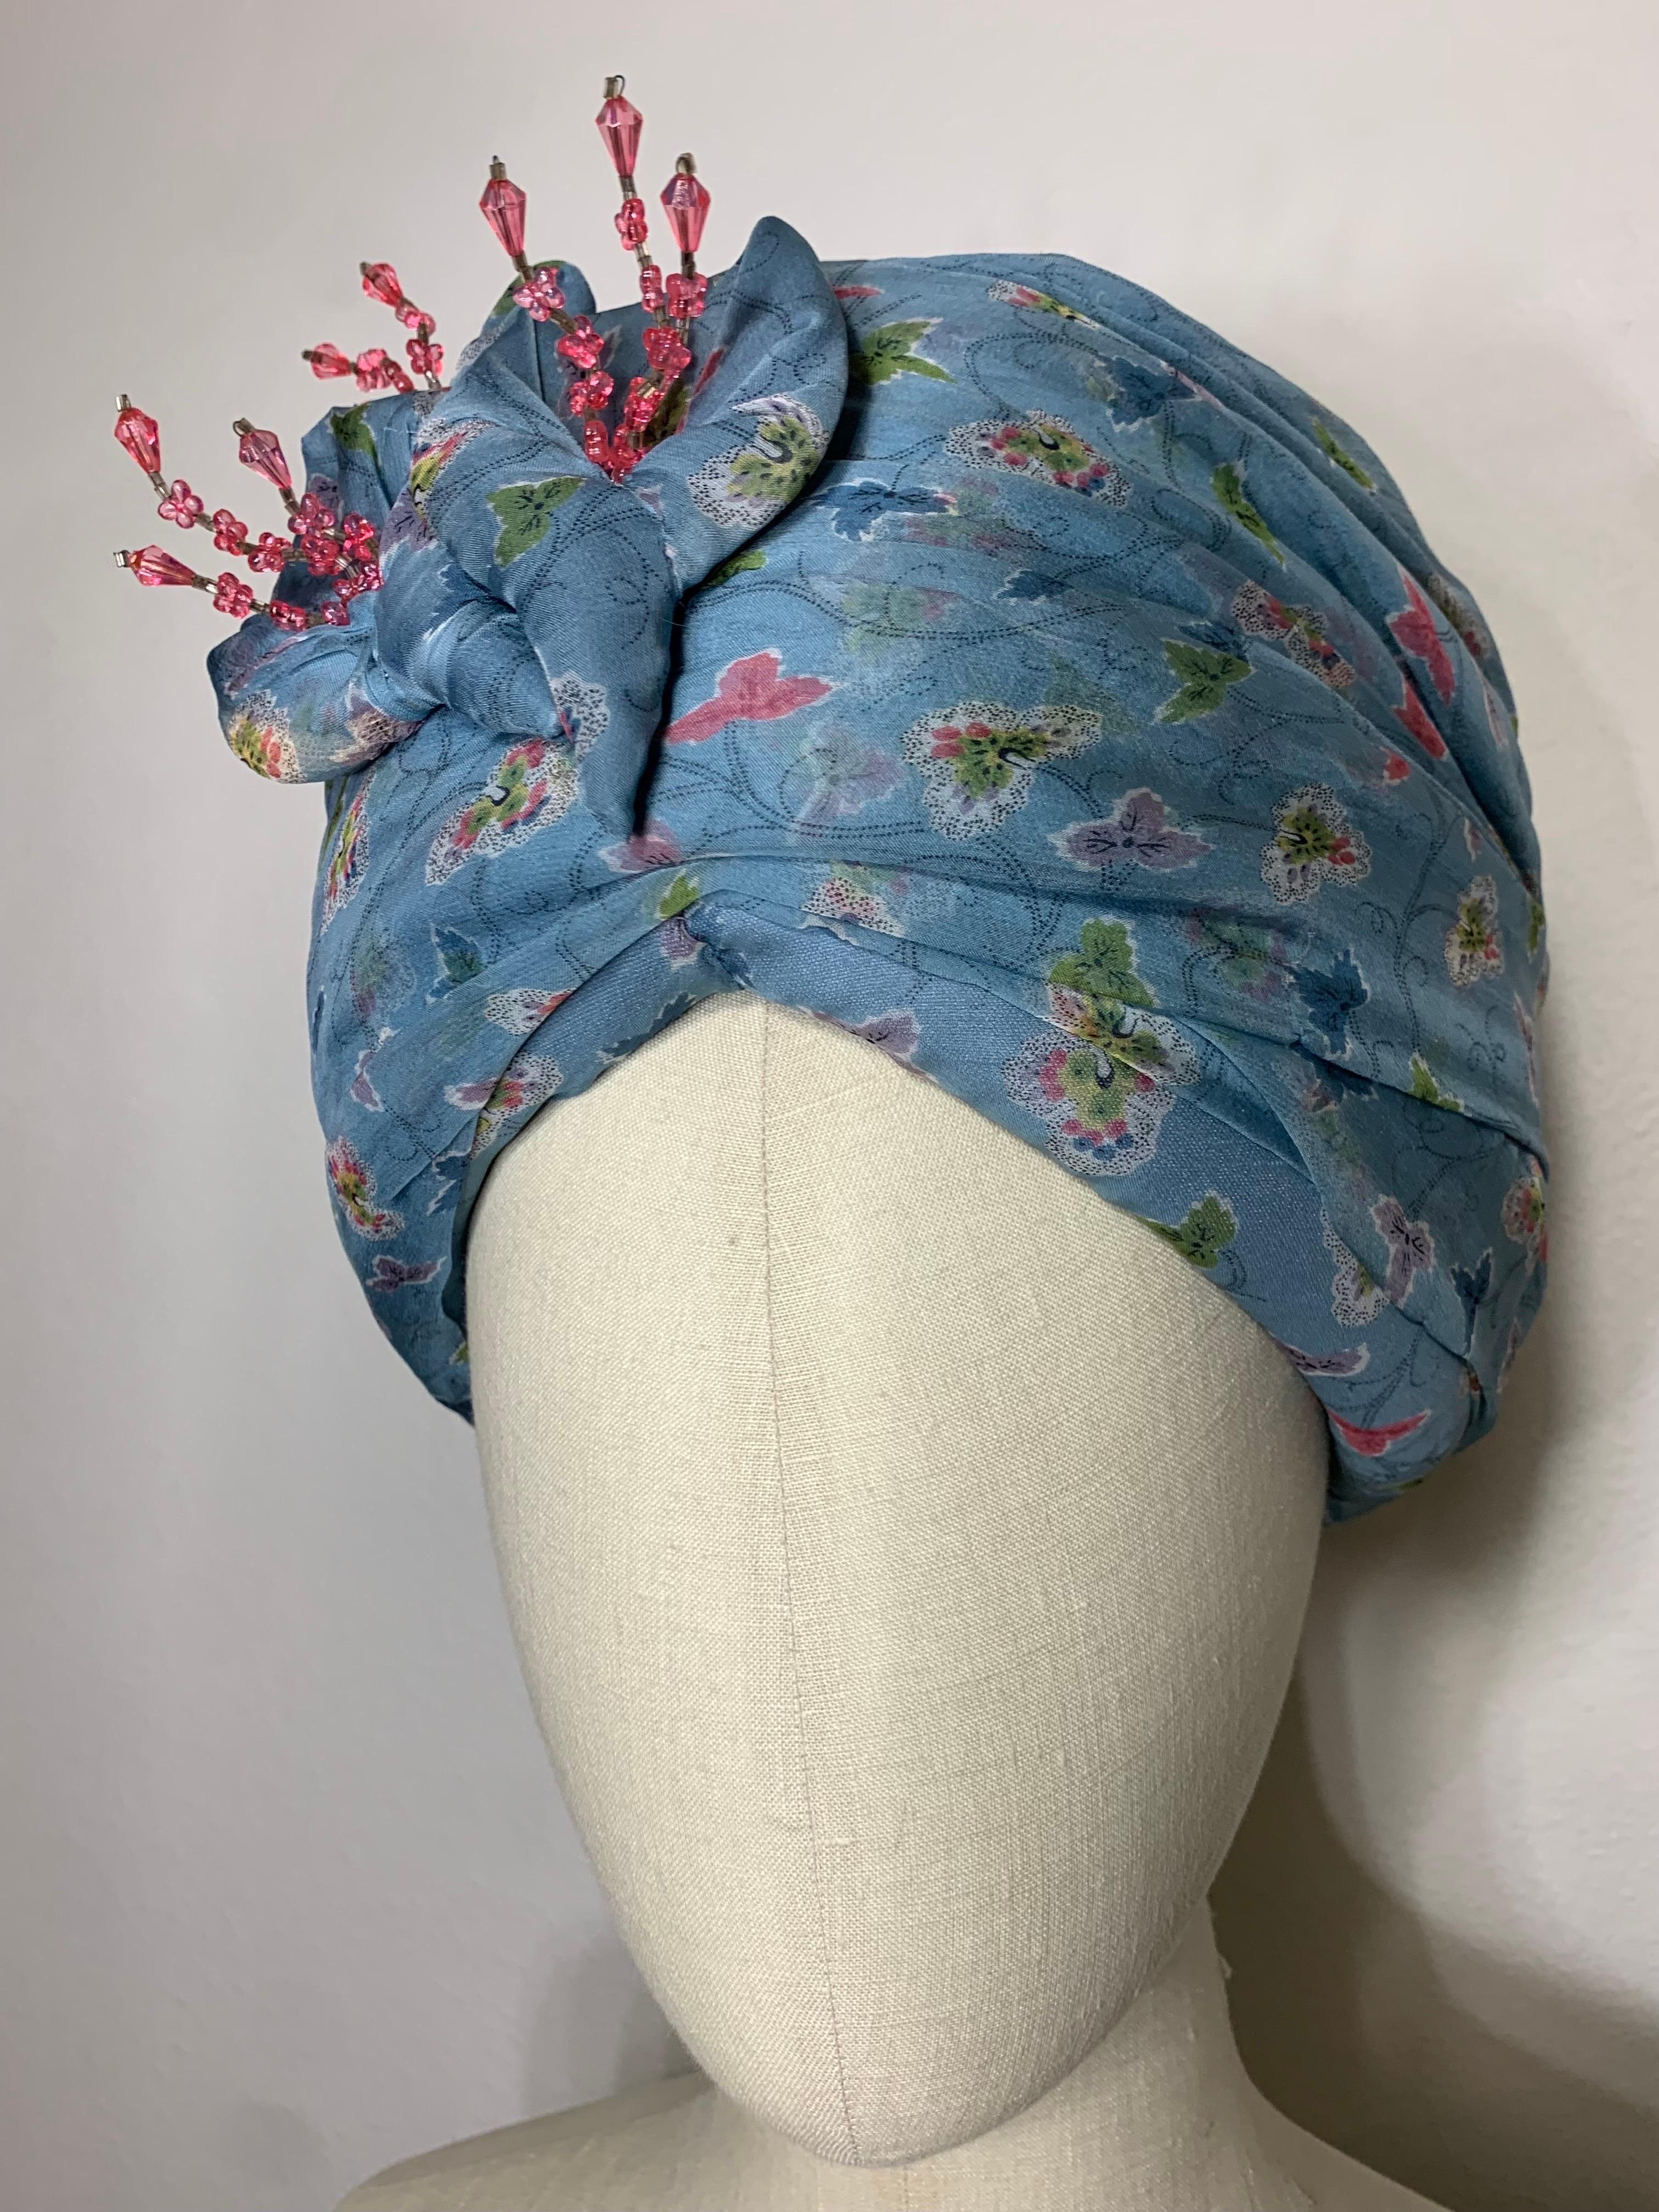 Custom Made Periwinkle Blue Floral Print Turban w  Fabric Lilies and Crystal Center Stamen Embellishment: Created by Suzanne Couture Millinery with a lovely print silk chiffon fabric draped over a stiffened buckram base. Matching hat pin included.